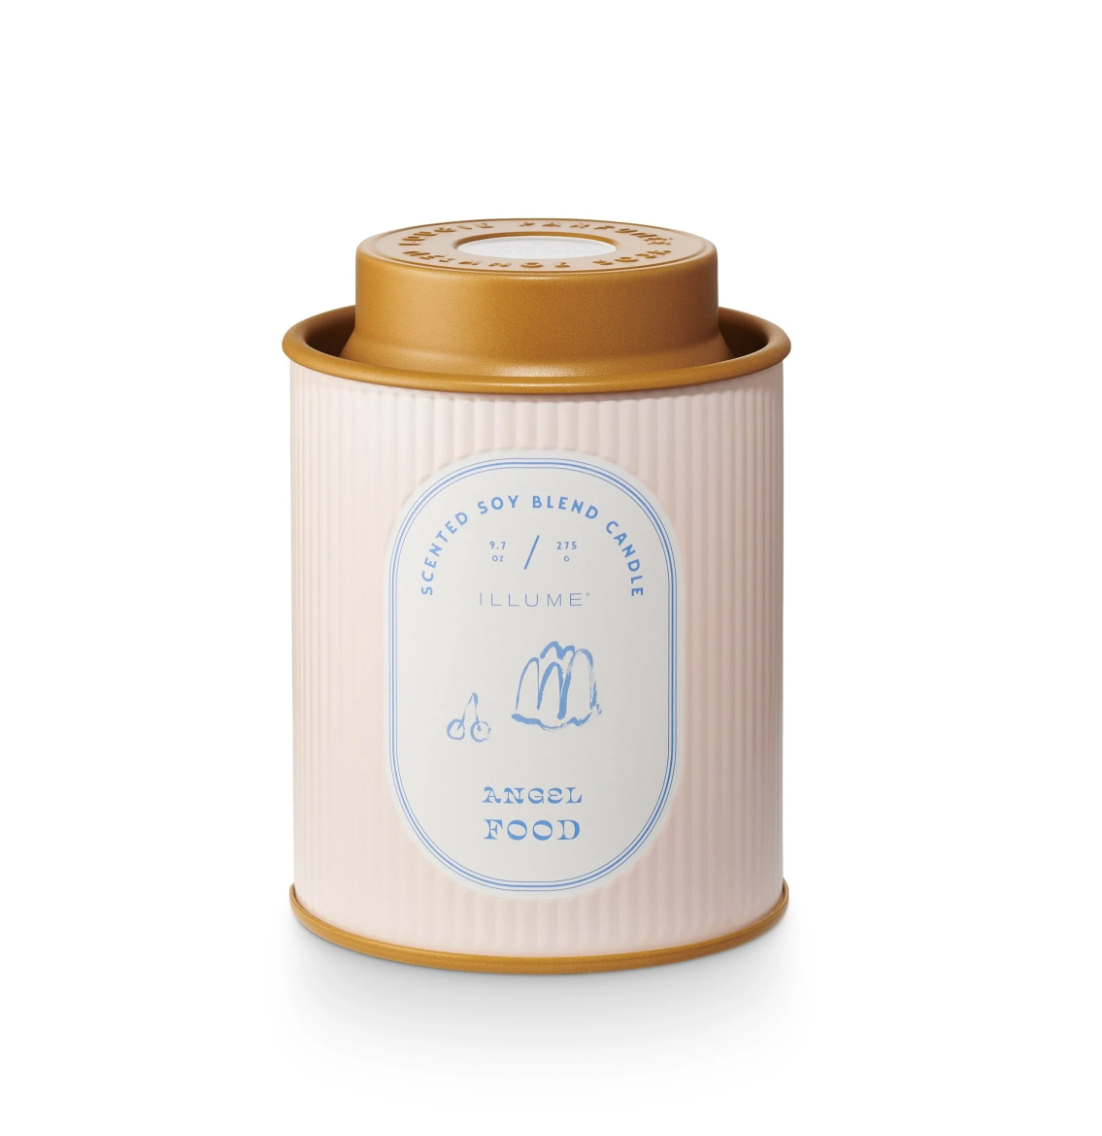 An elegant Illume soy blend candle in a cylindrical beige container with a gold lid, labeled &quot;Bungalow Angel Food&quot; in blue print, isolated on a white background.